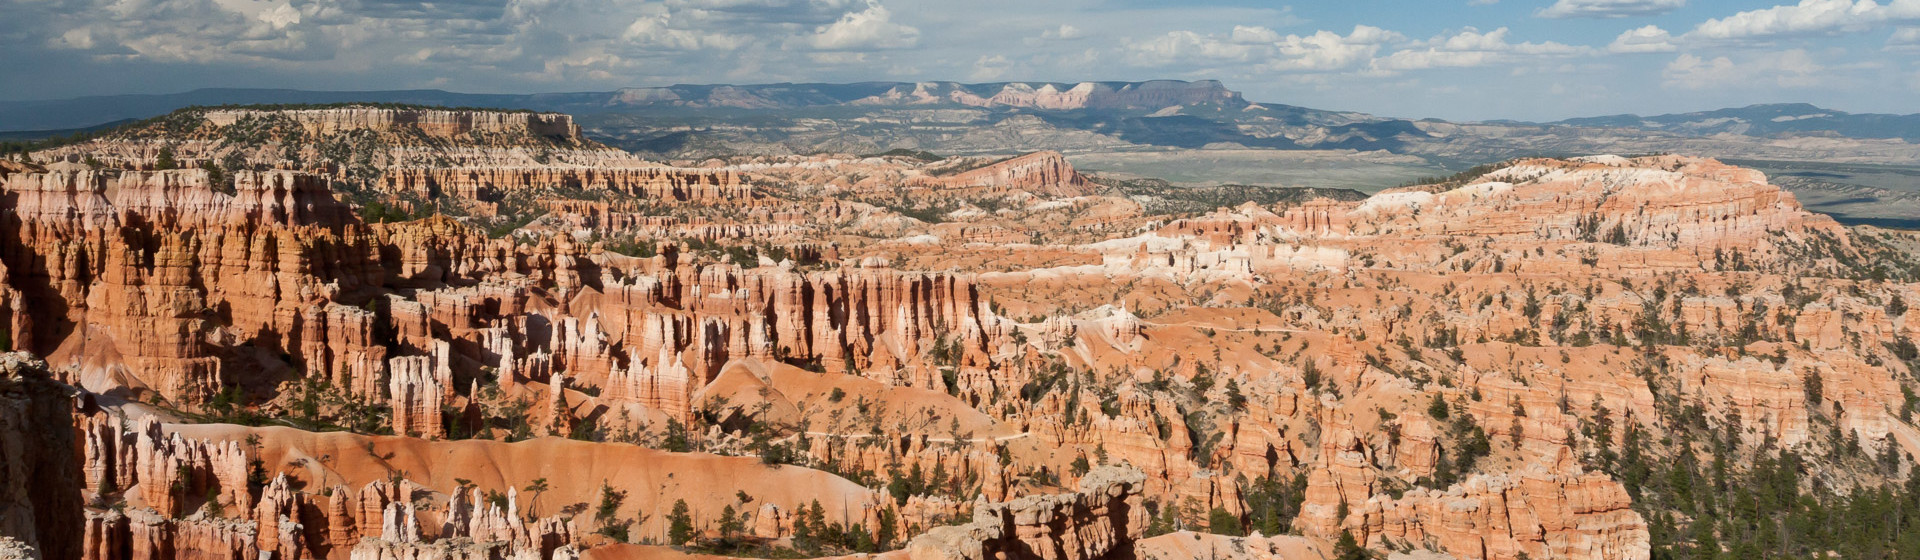 16./17.6. Bryce Canyon - Sunset Point